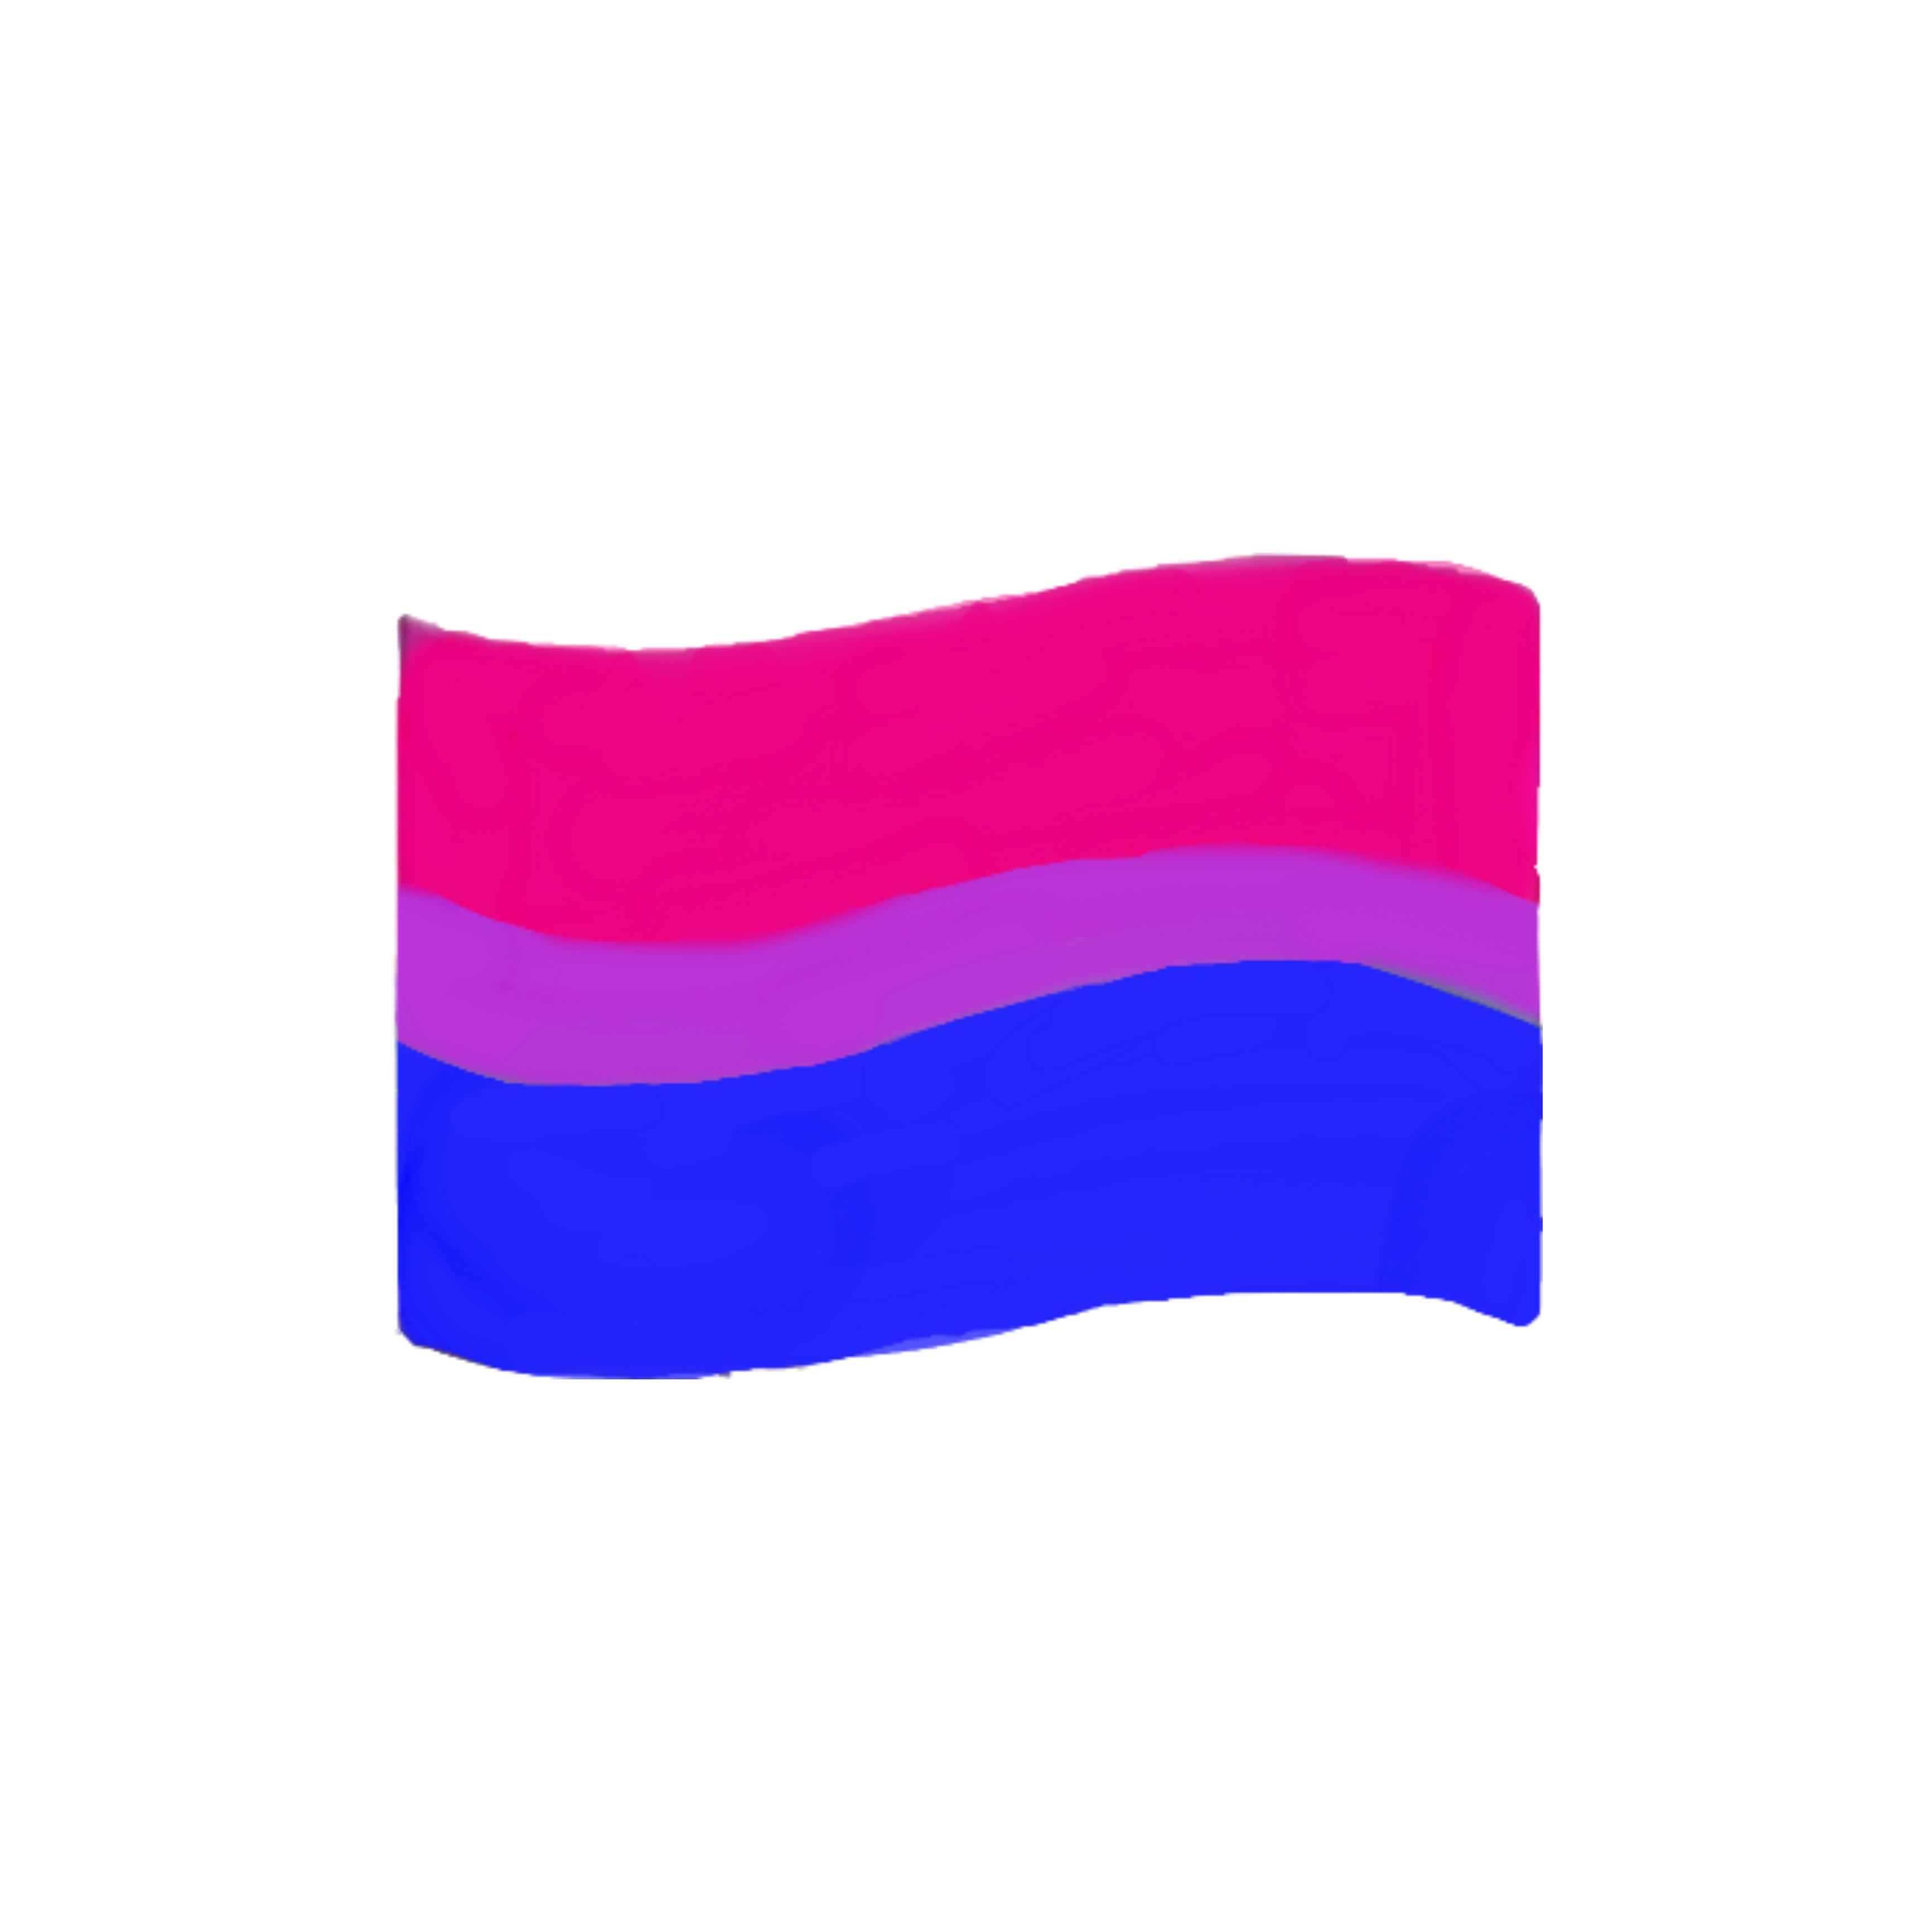 Bisexual flags